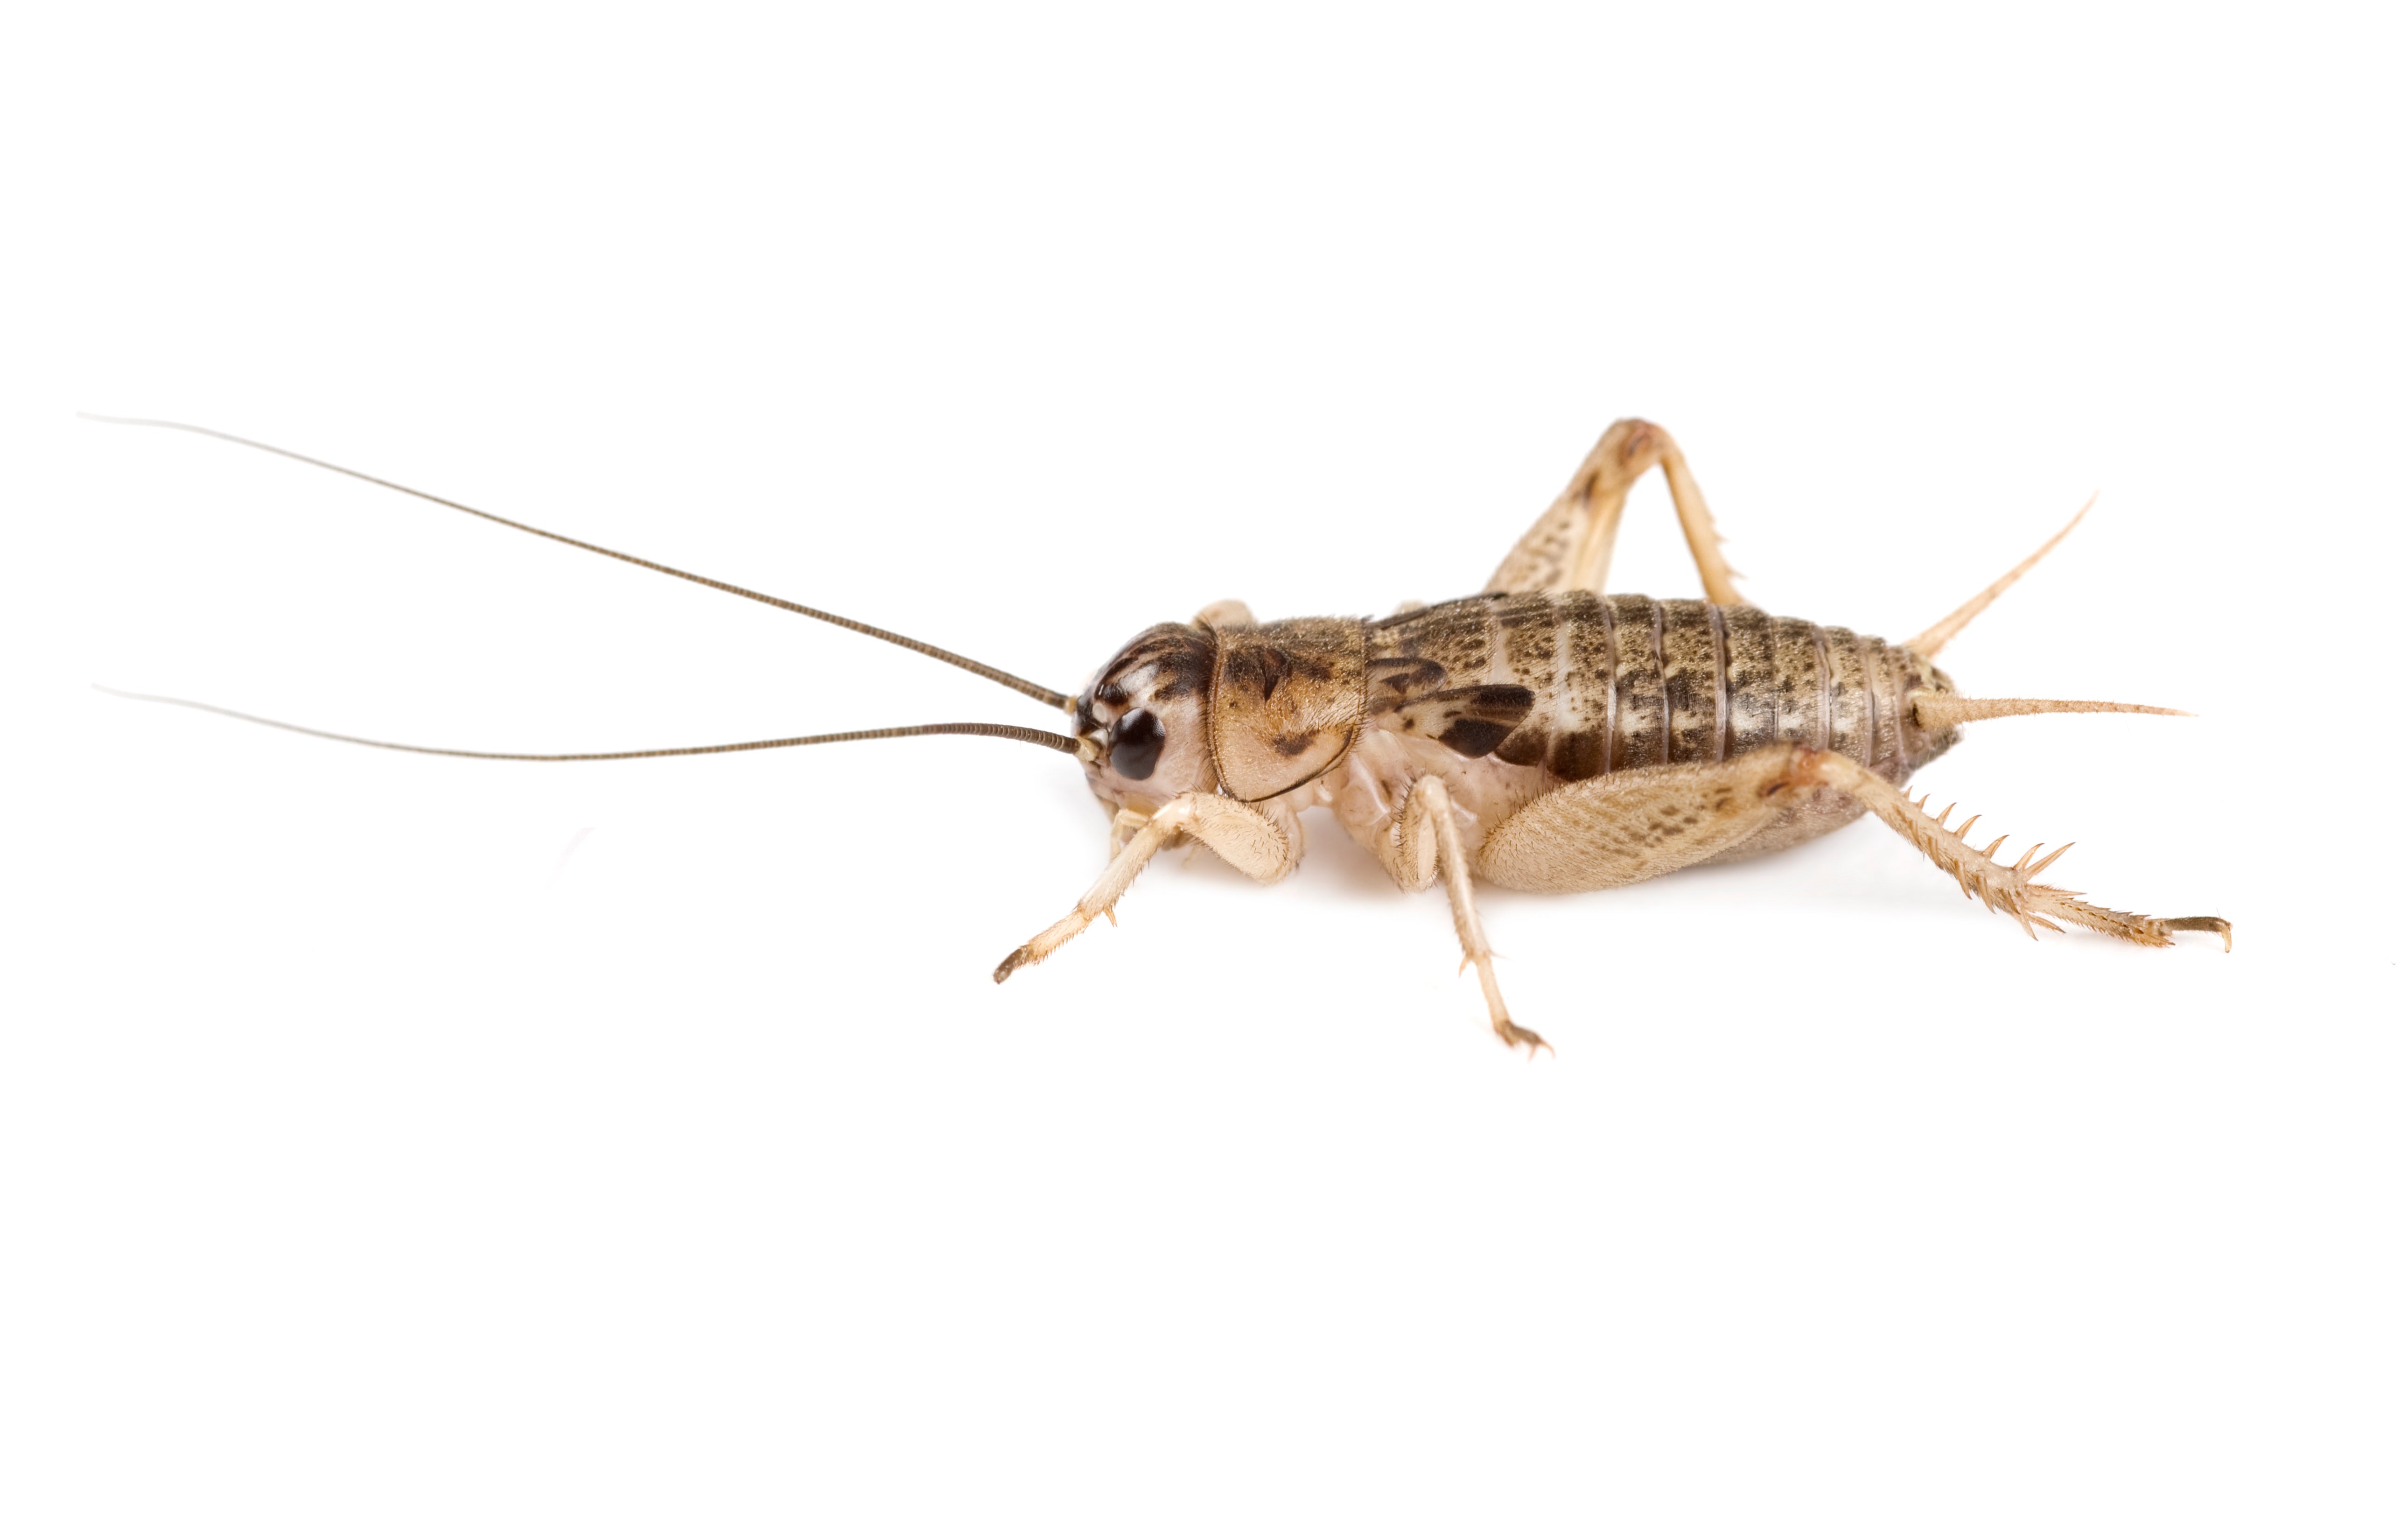 Georgia Crickets - Want something you can keep your crickets in